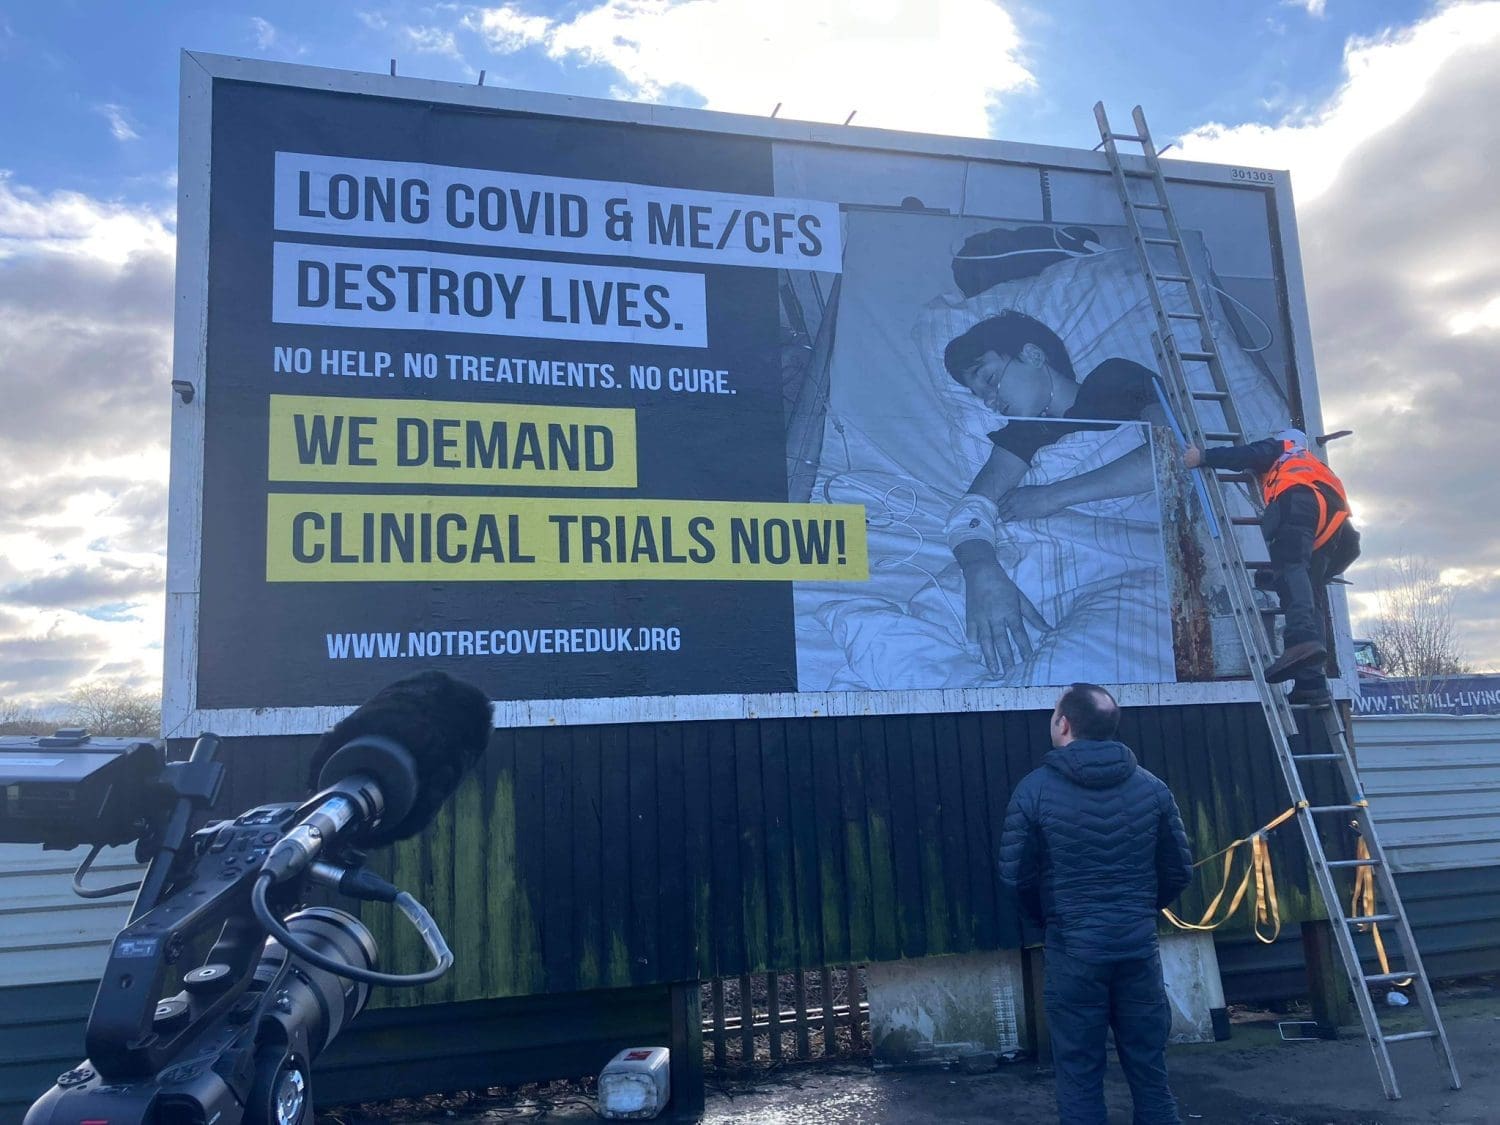 A billboard being put up that reads "Long covid and ME/CFS destroy lives. No help. no treatments. No cure. We demand clinical trials now. www.notrecovereduk.org"